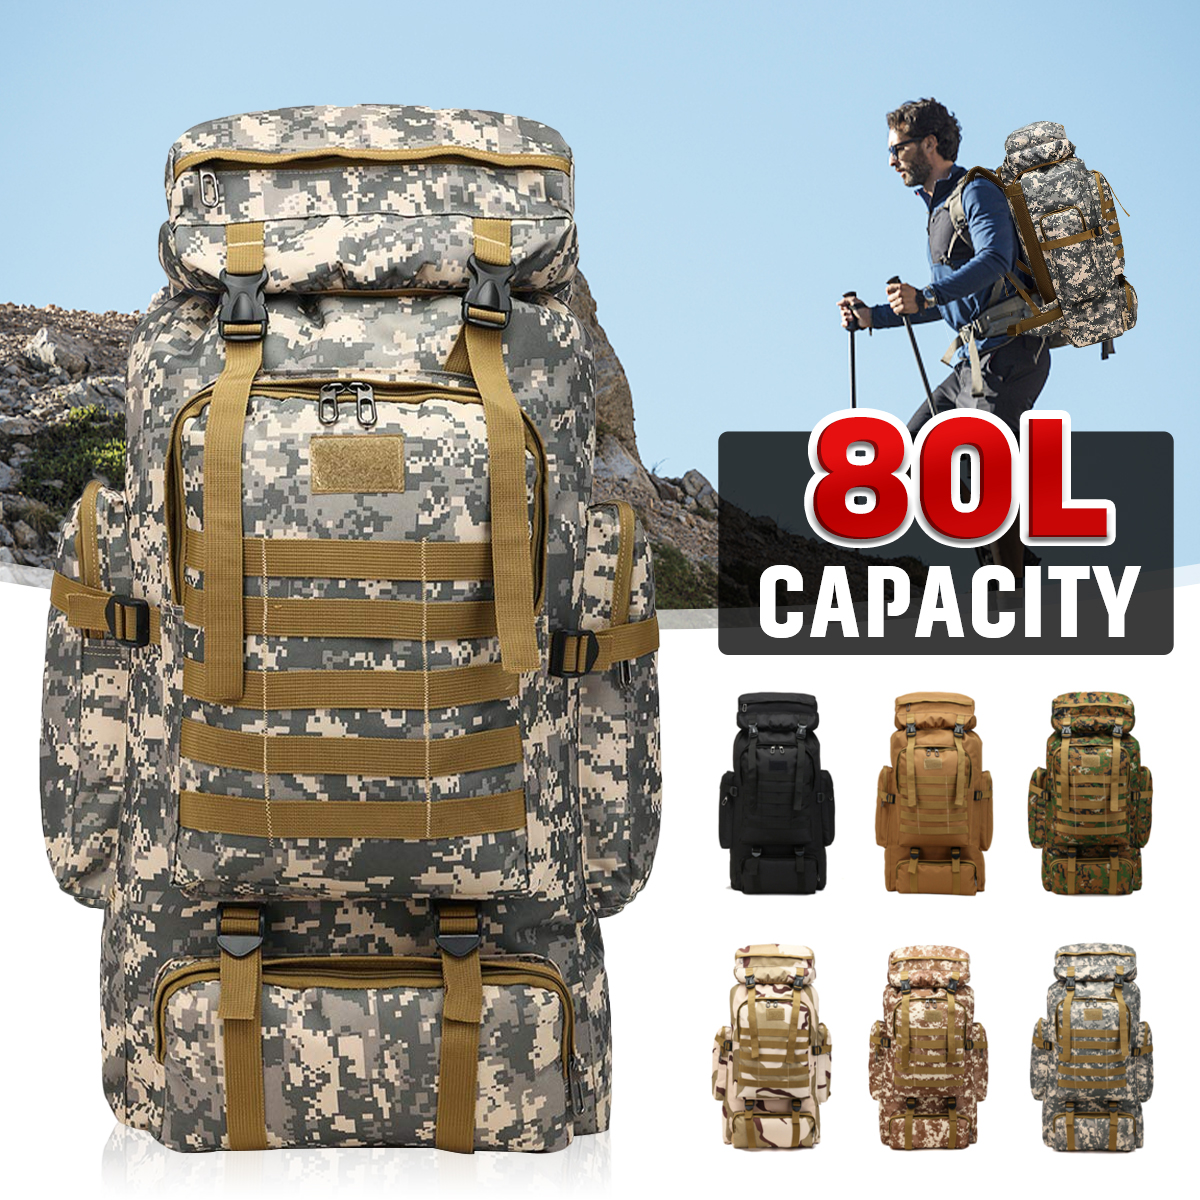 80L-Large-Capacity-with-Mobile-Phone-Storage-Bags-Outdoor-Hiking-Backpack-1869569-1